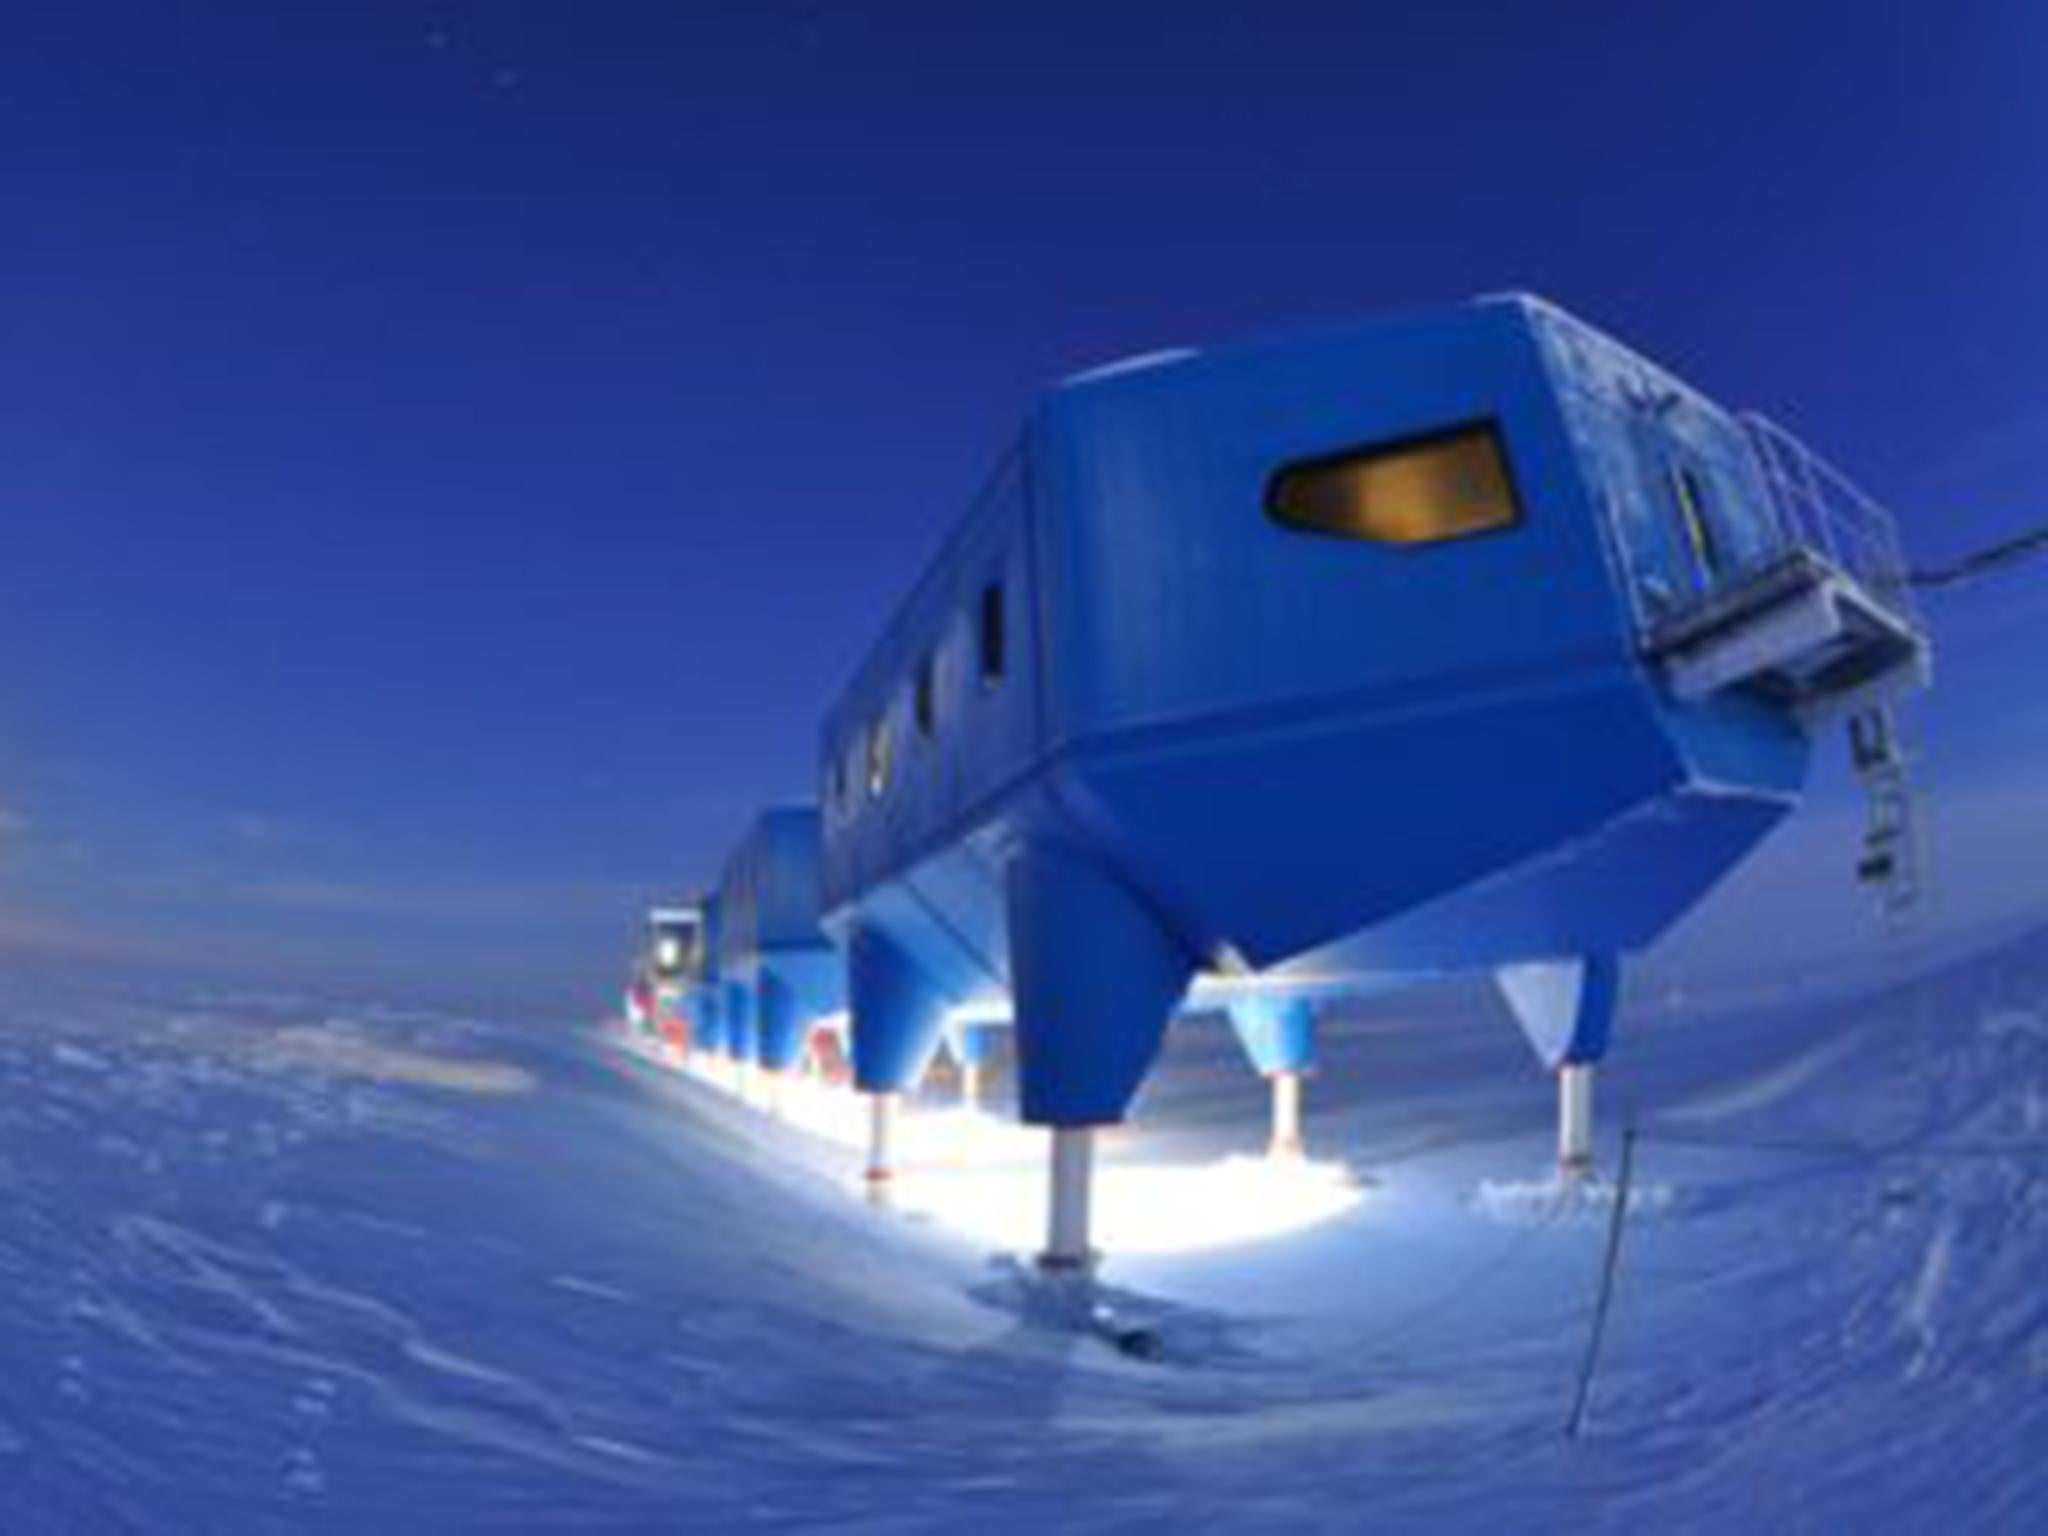 The Halley VI Research Station